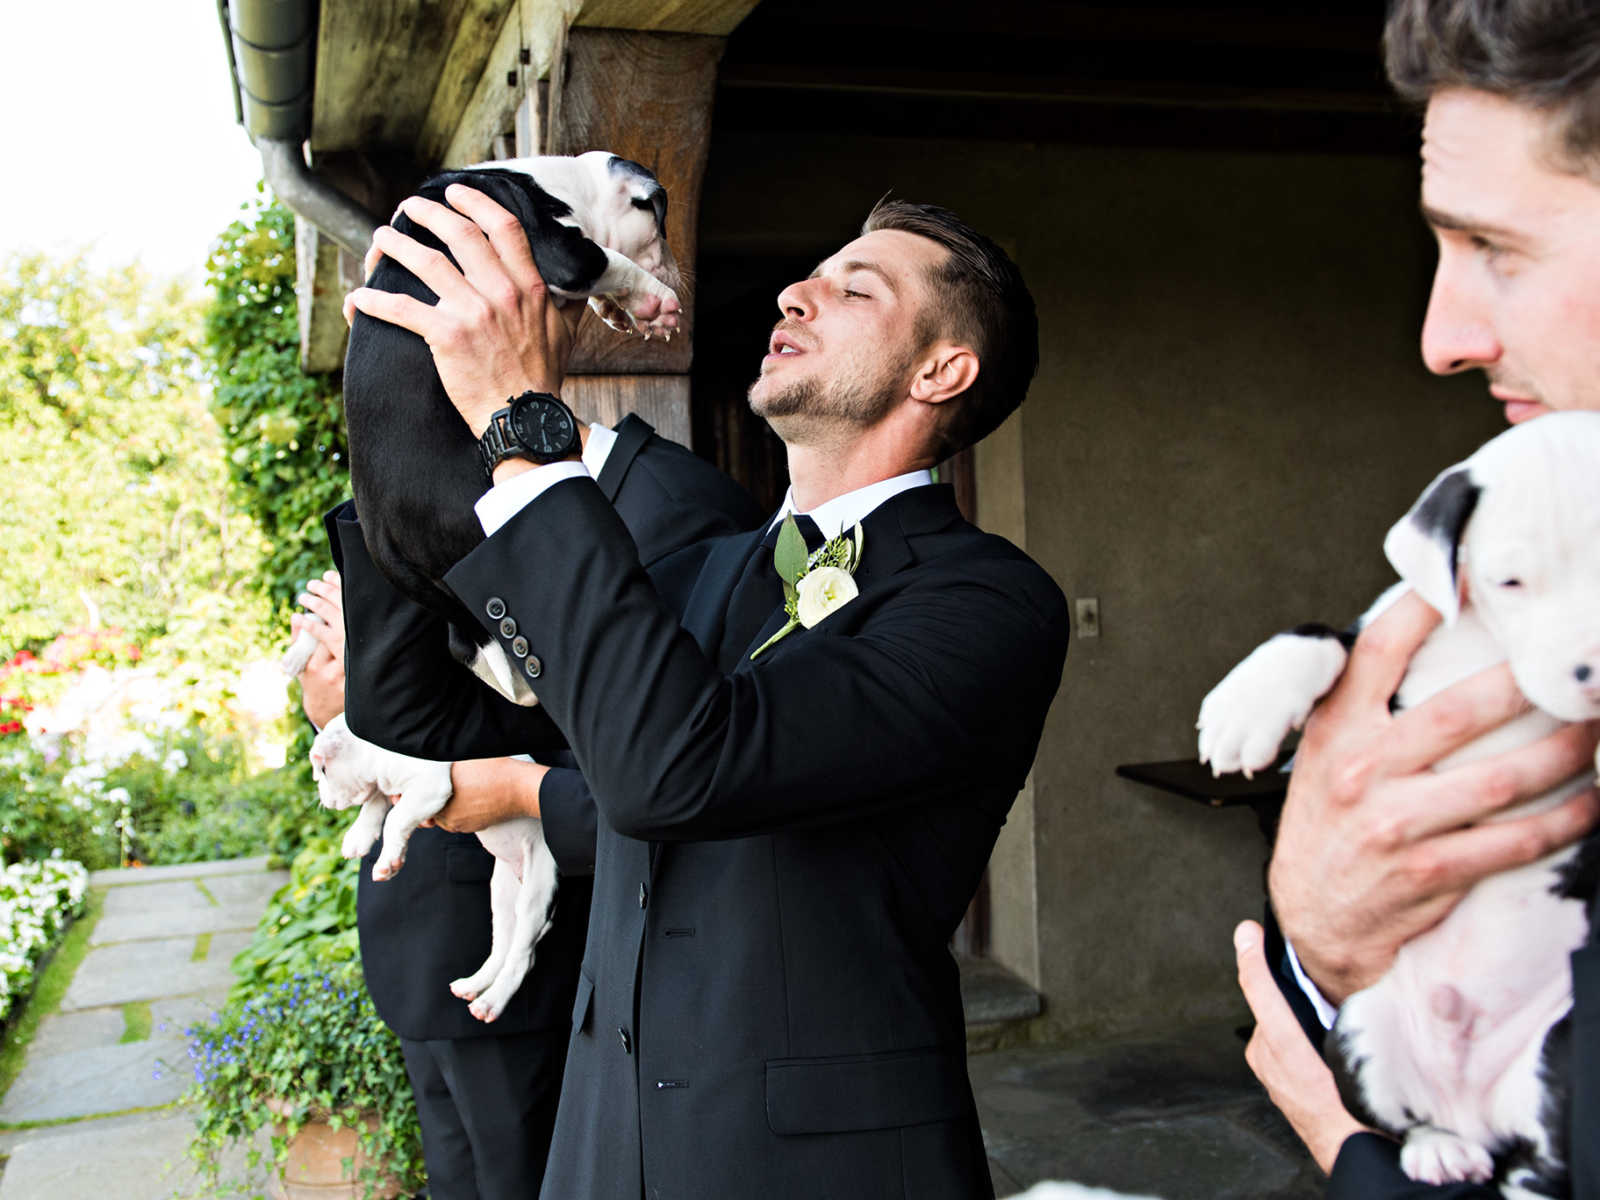 Groomsman holds up rescue puppy in the air so they are eye to eye